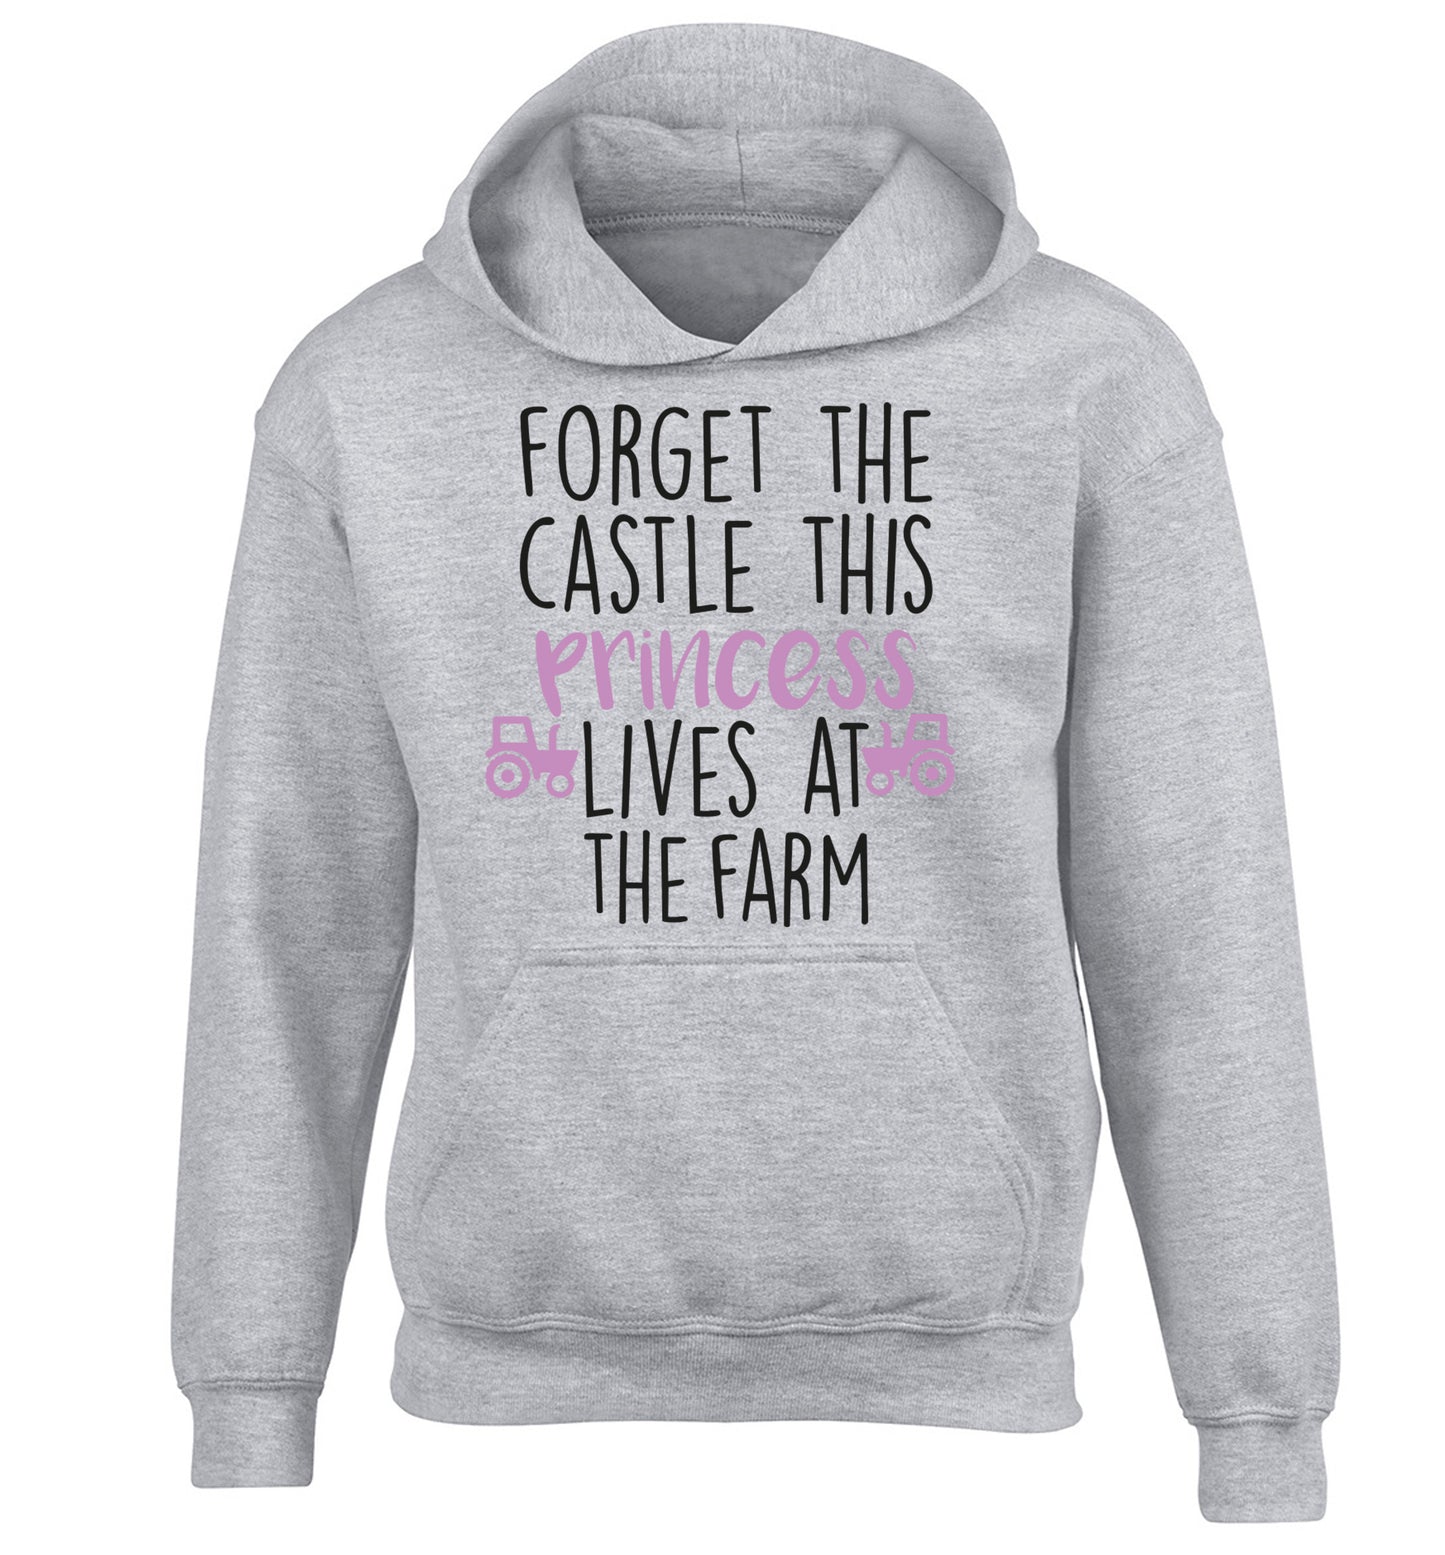 Forget the castle this princess lives at the farm children's grey hoodie 12-14 Years